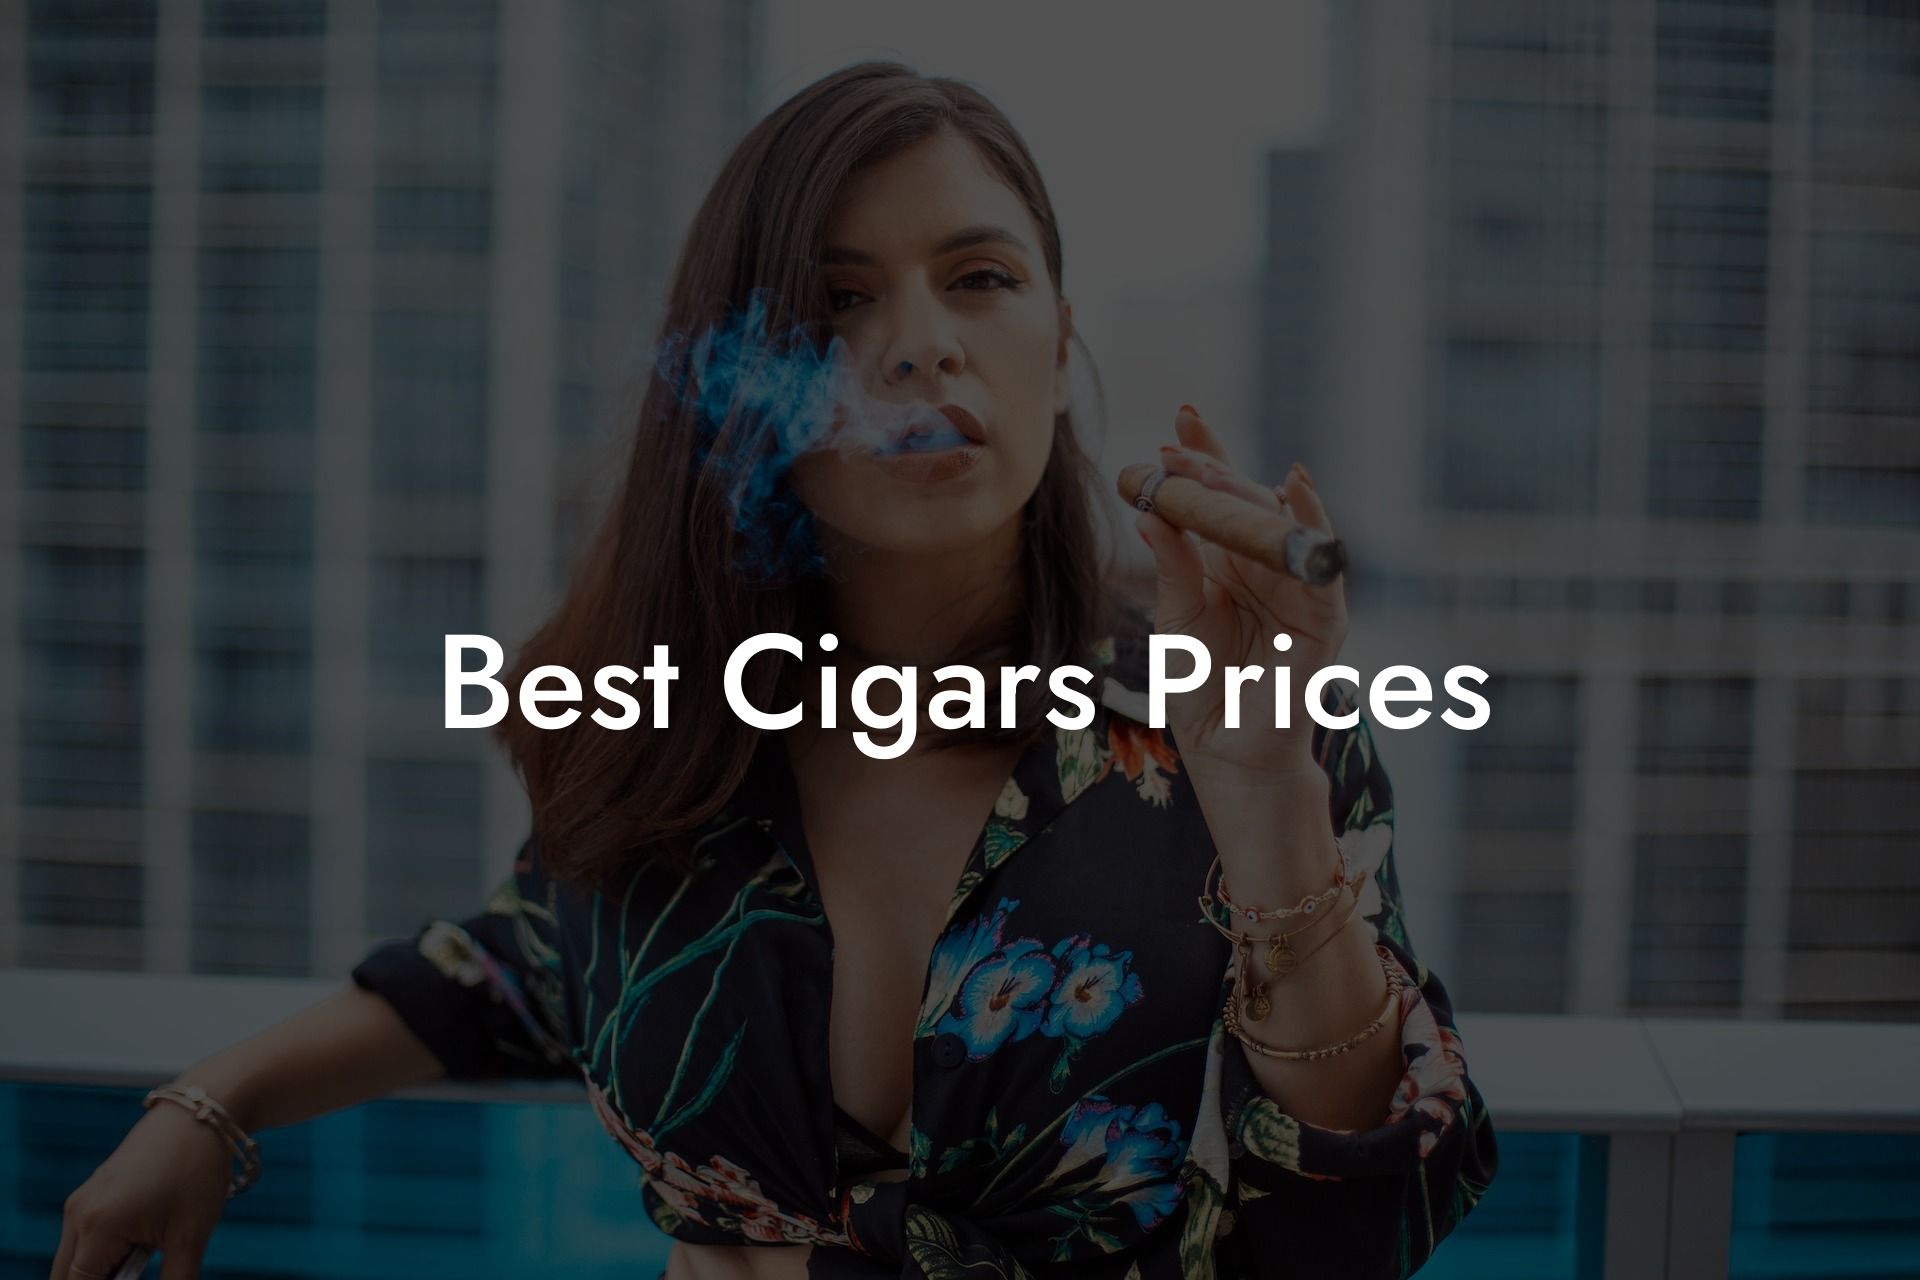 Best Cigars Prices